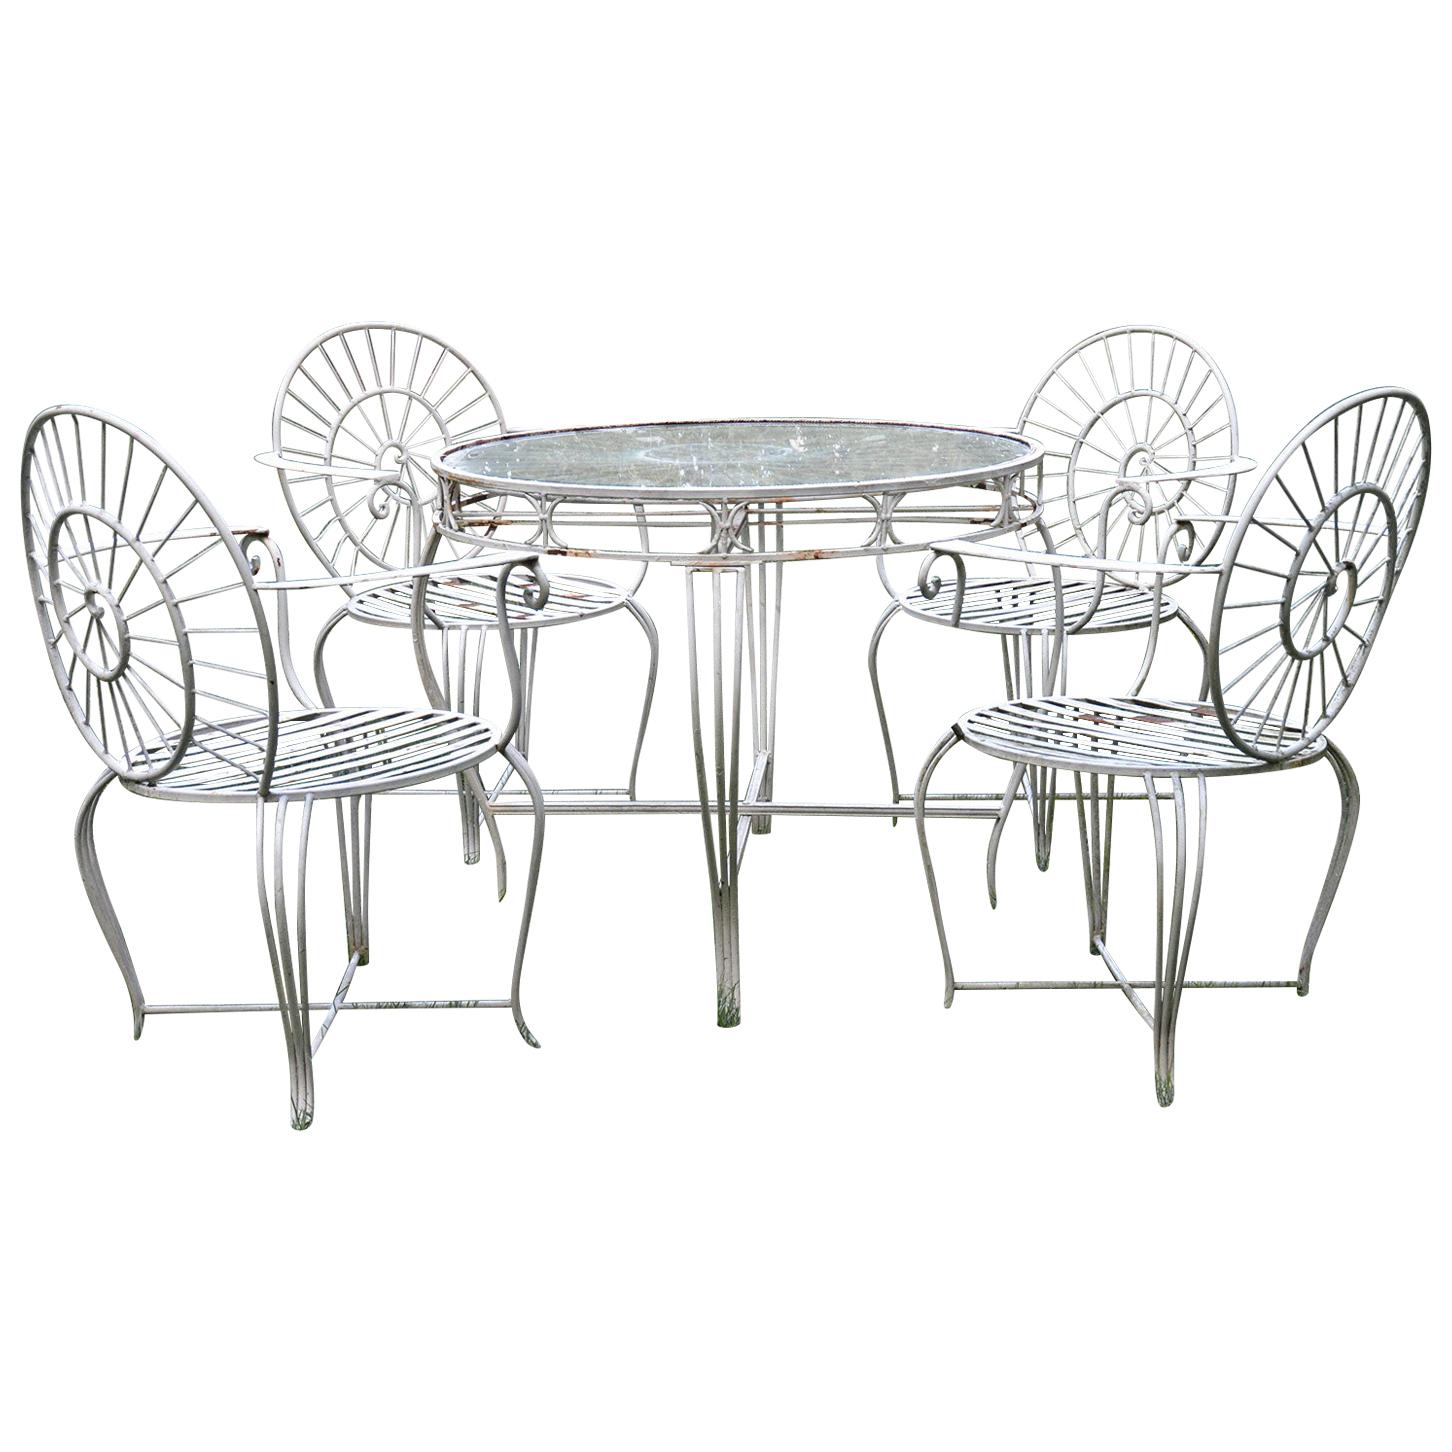 White Iron Four-Person Table and Chairs